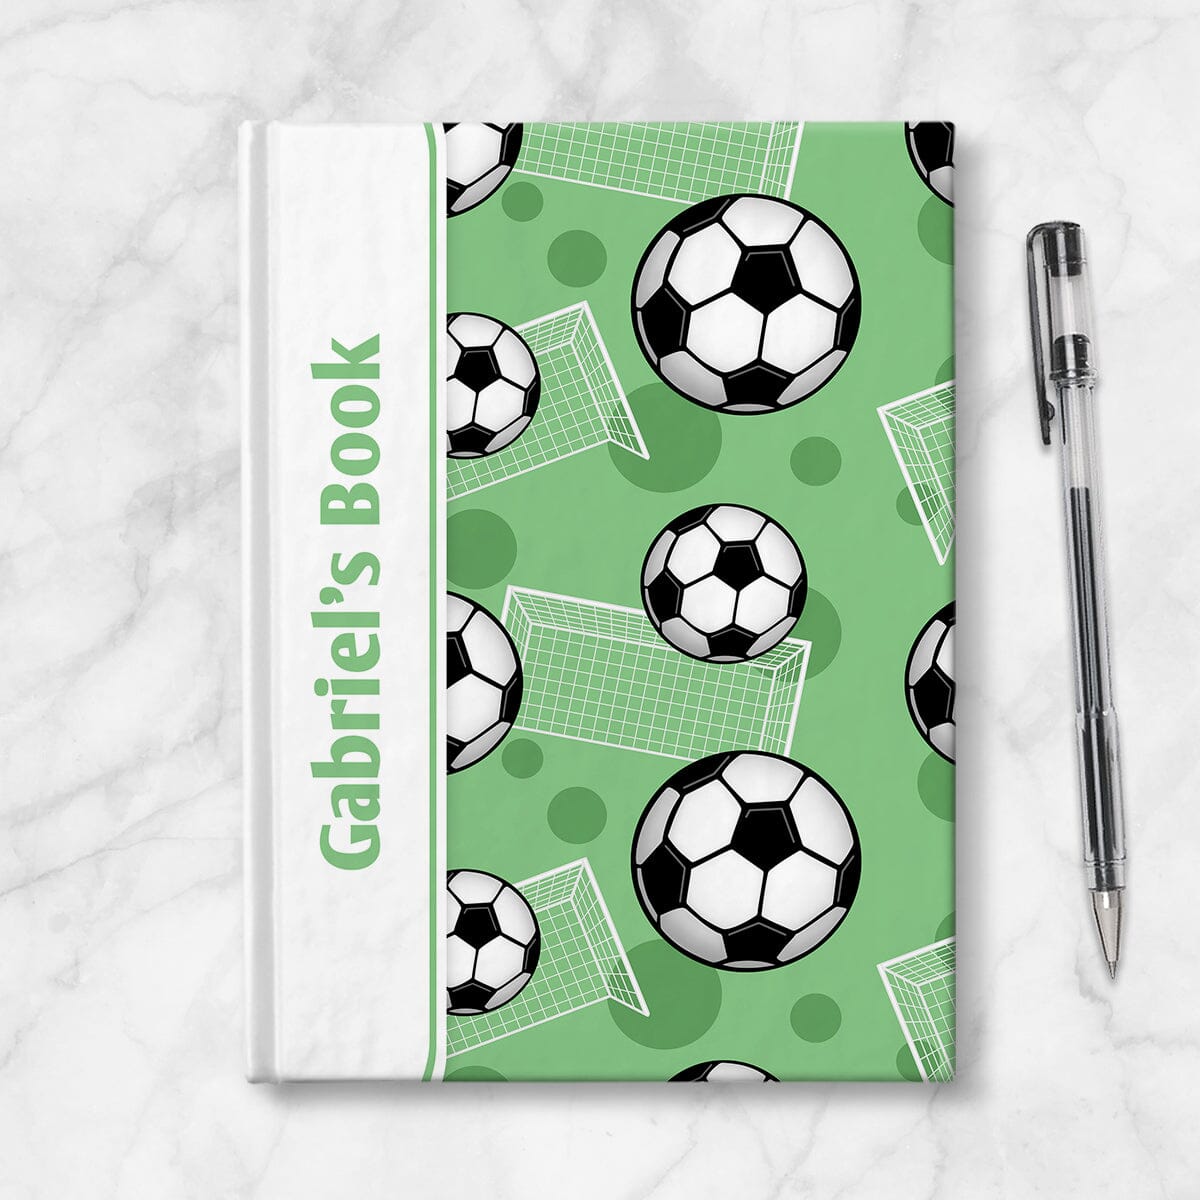 Personalized Green Soccer Journal at Artistically Invited. Image shows the book on a countertop with a pen next to it.